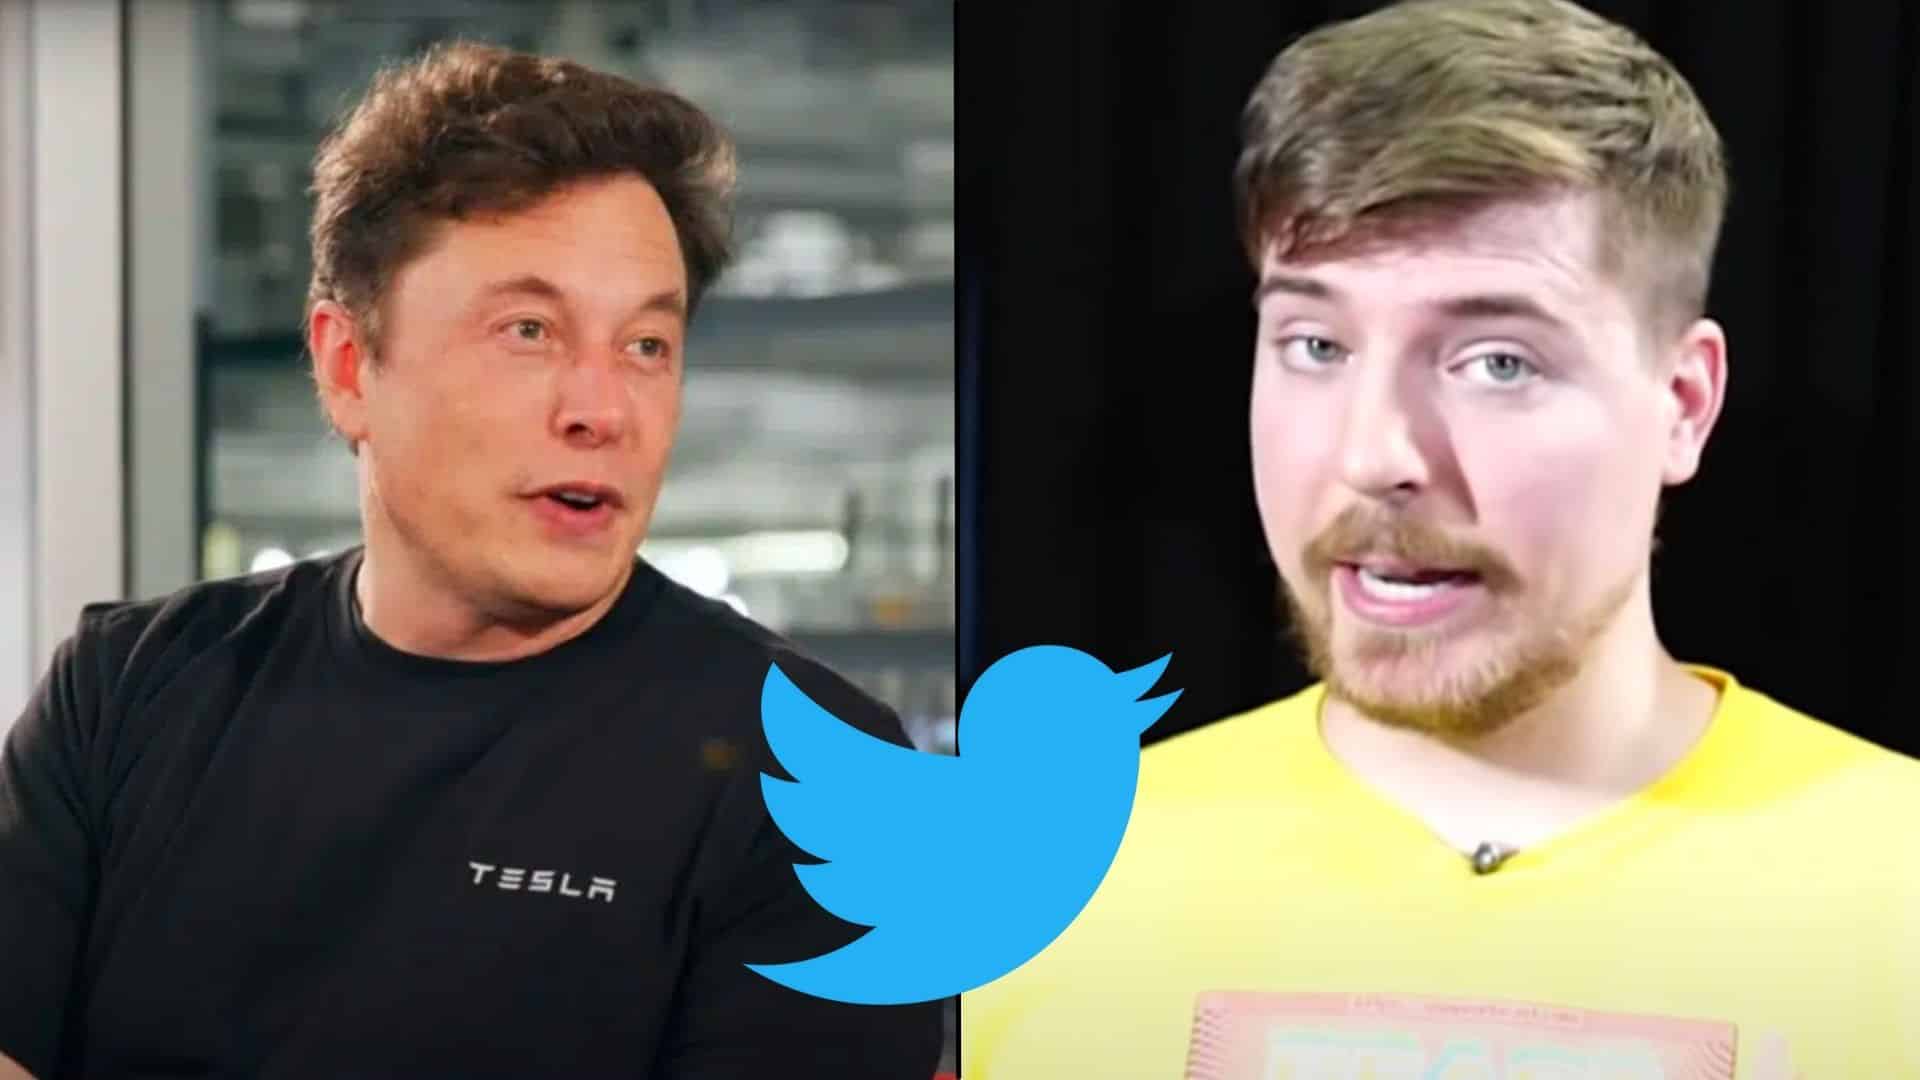 Elon Musk and MrBeast side-by-side with Twitter logo